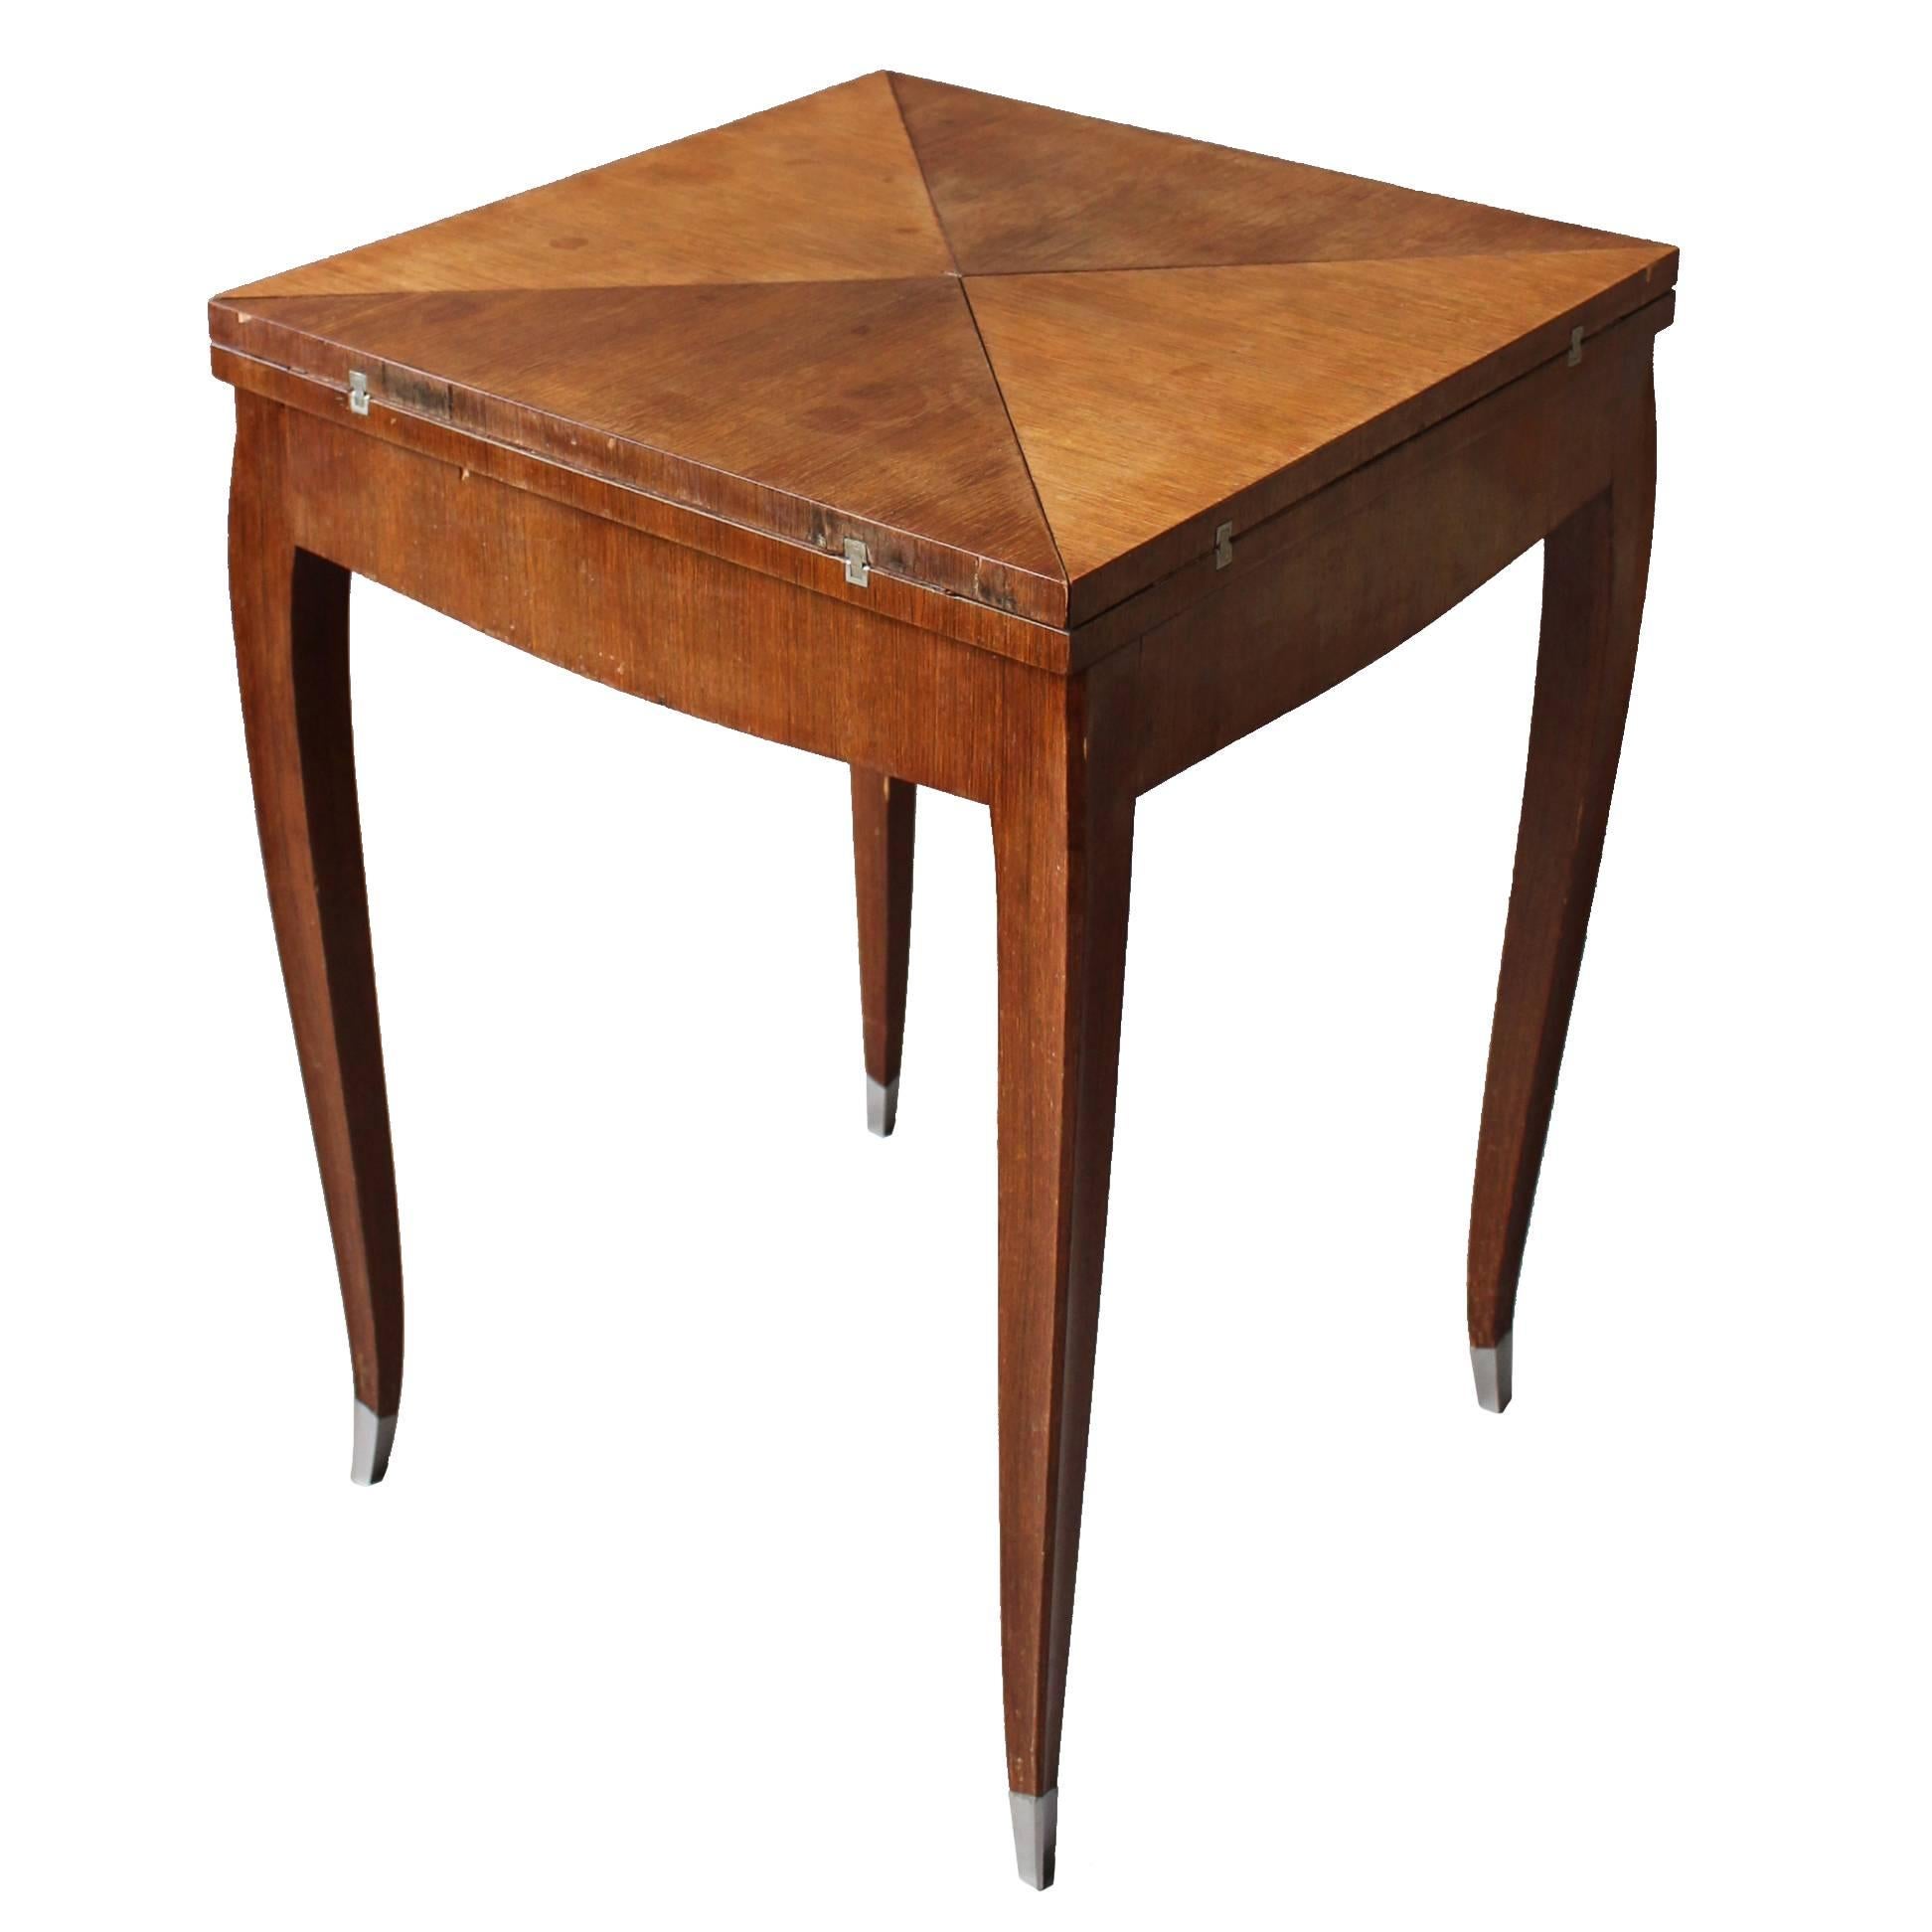 A Fine French Art Deco Rosewood Envelope Game Table